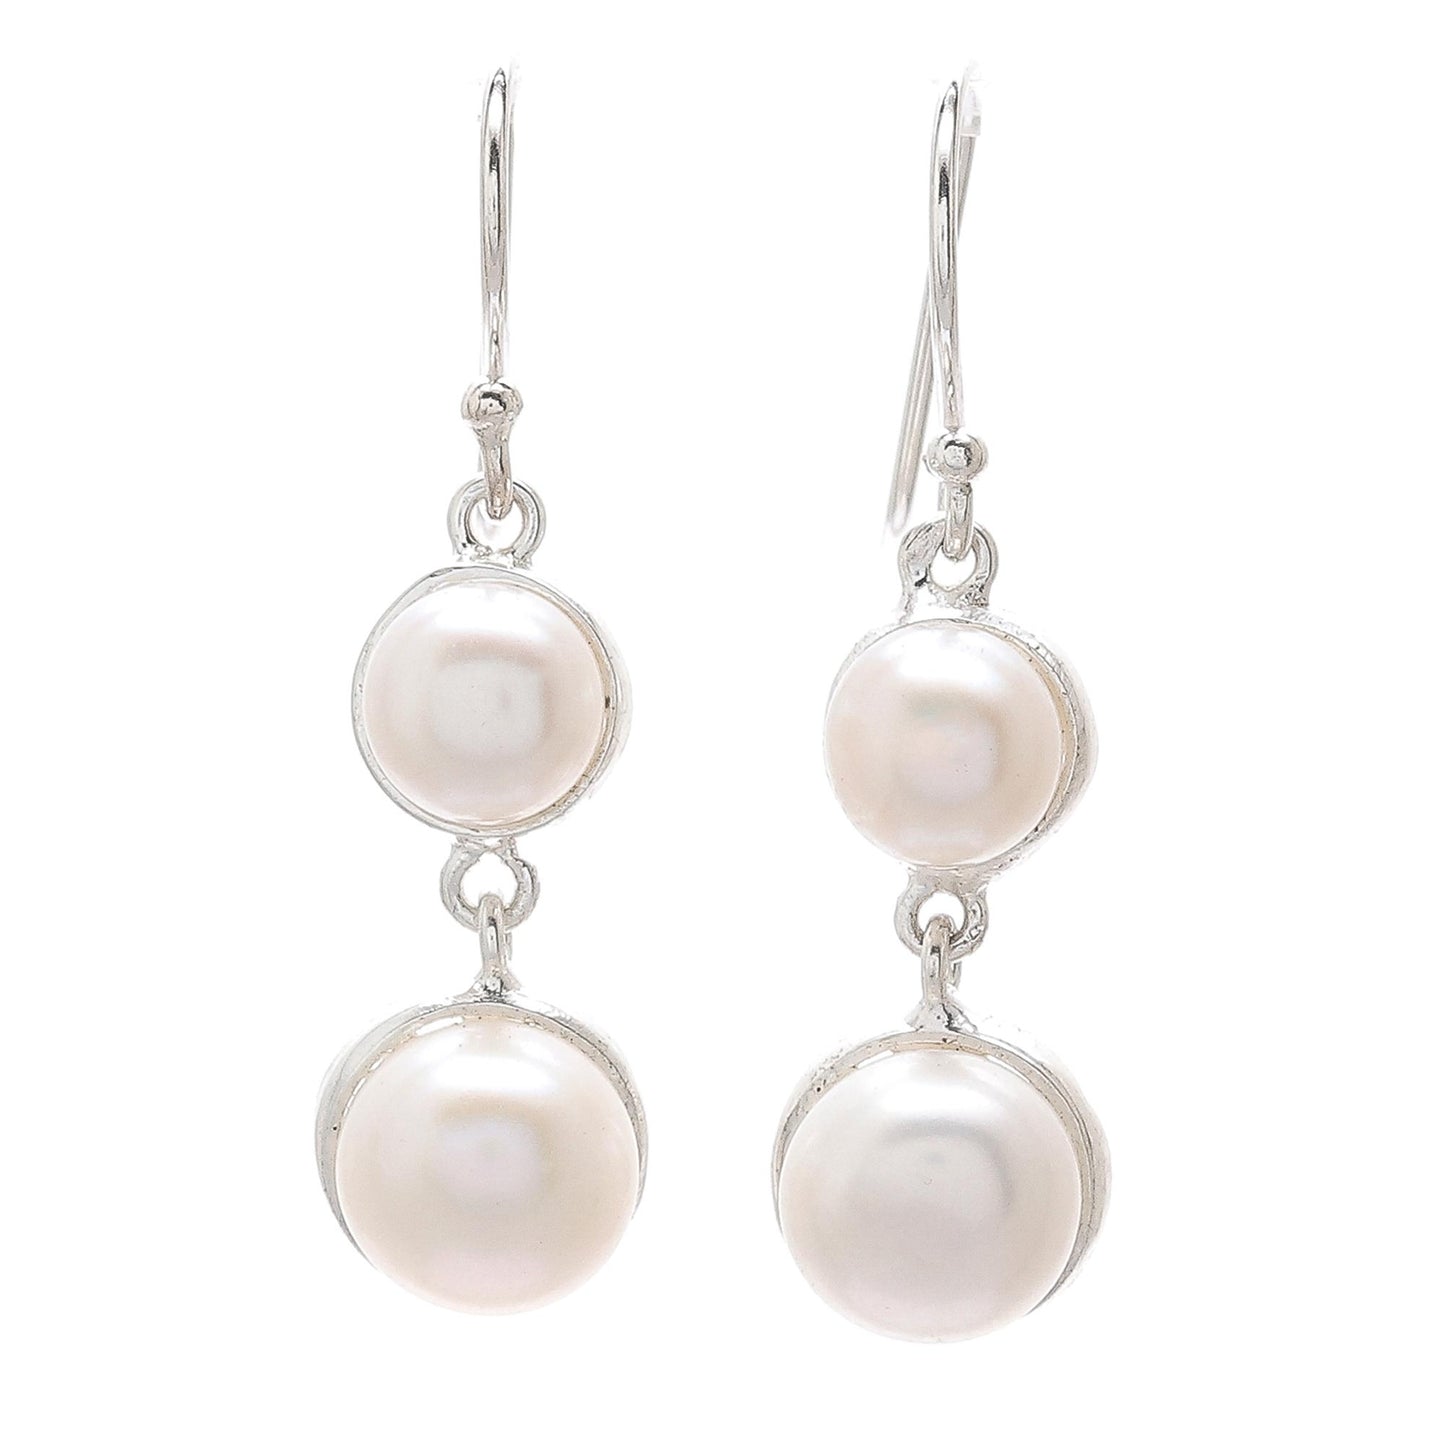 Double Moons Dangle Earrings with White Cultured Pearls from Thailand